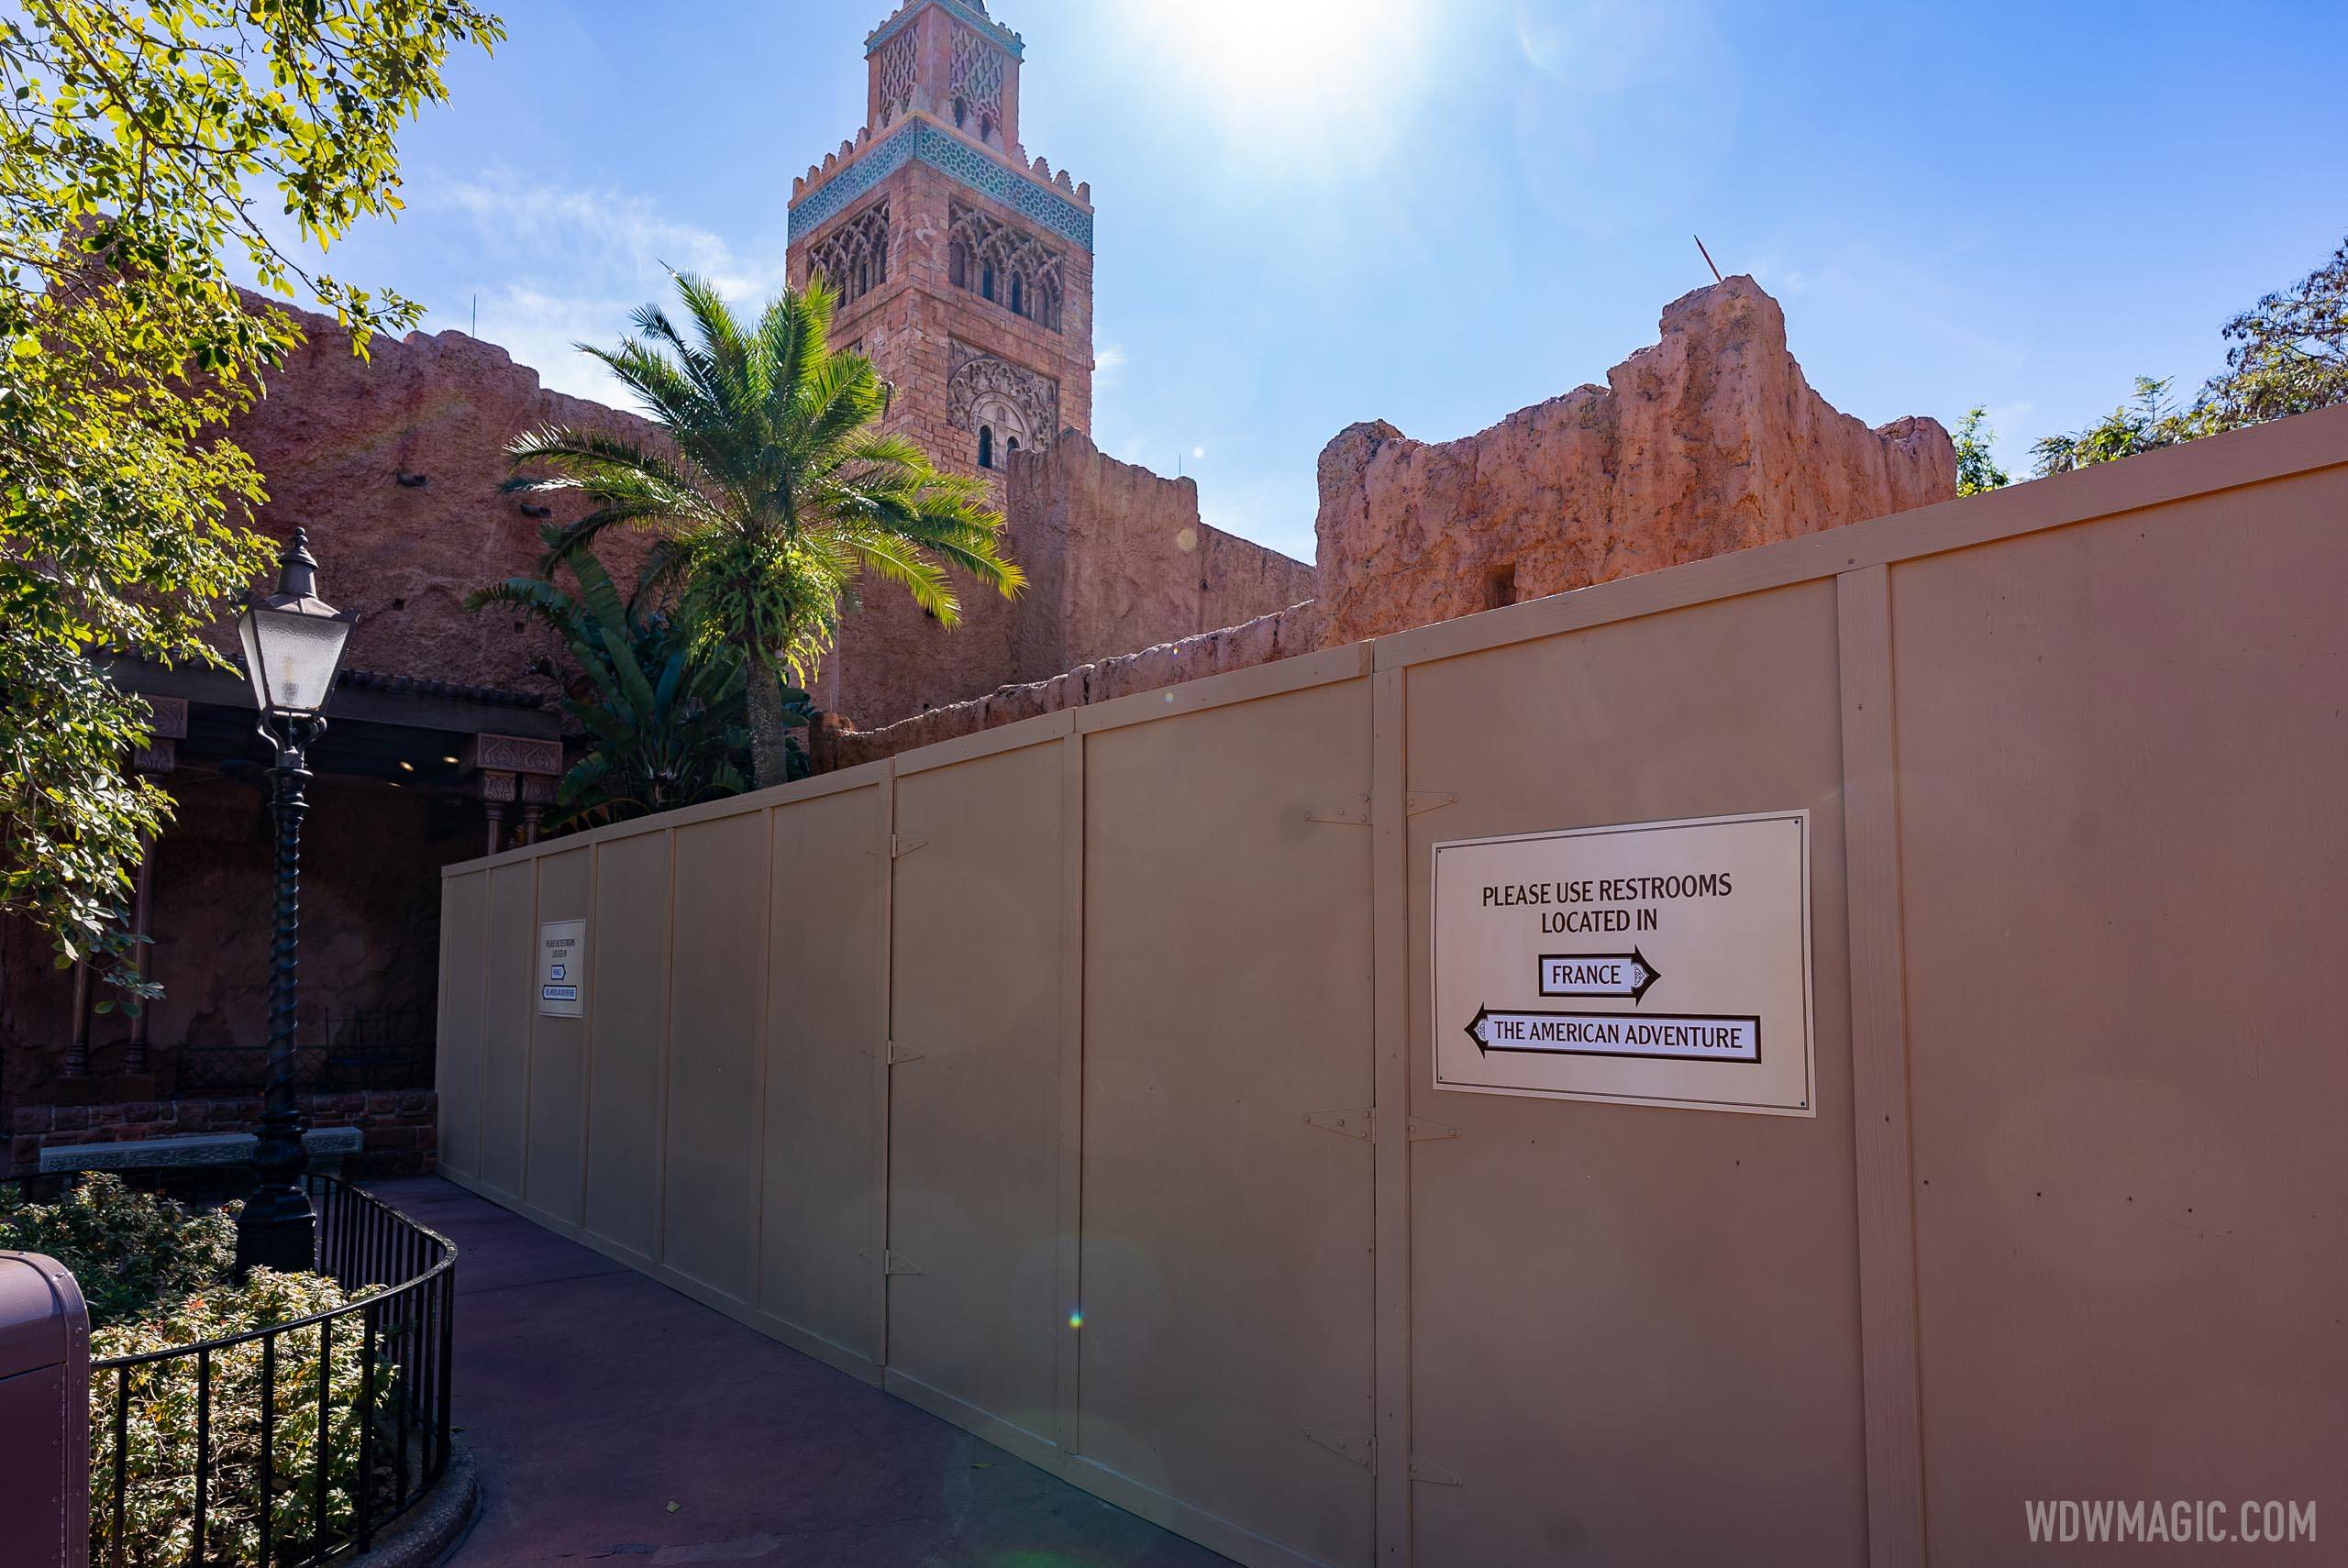 PHOTOS - Morocco pavilion restrooms now closed for refurbishment